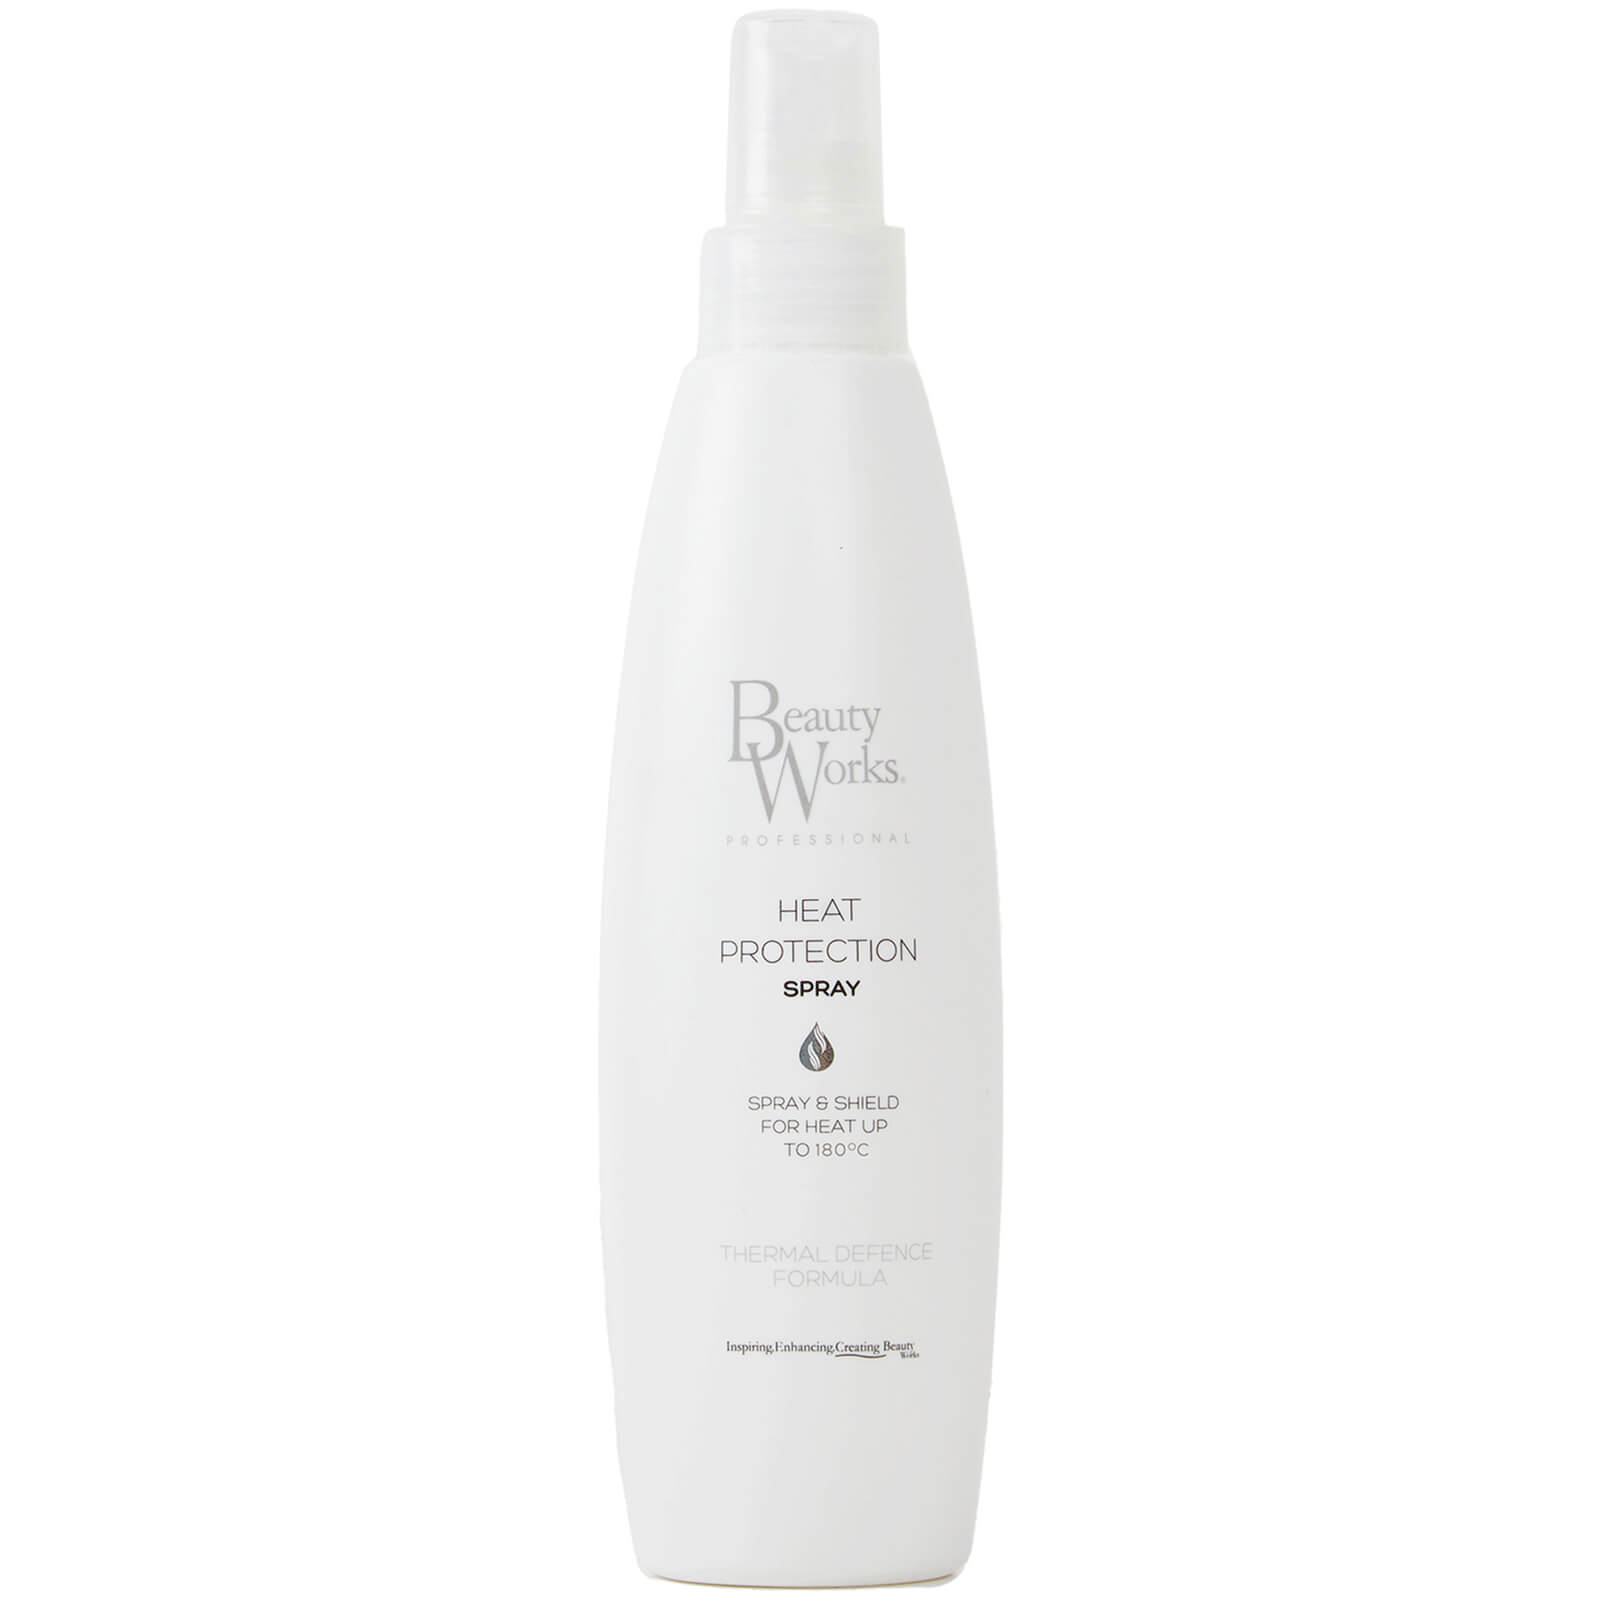 Image of Beauty Works Heat Protection Spray 250ml